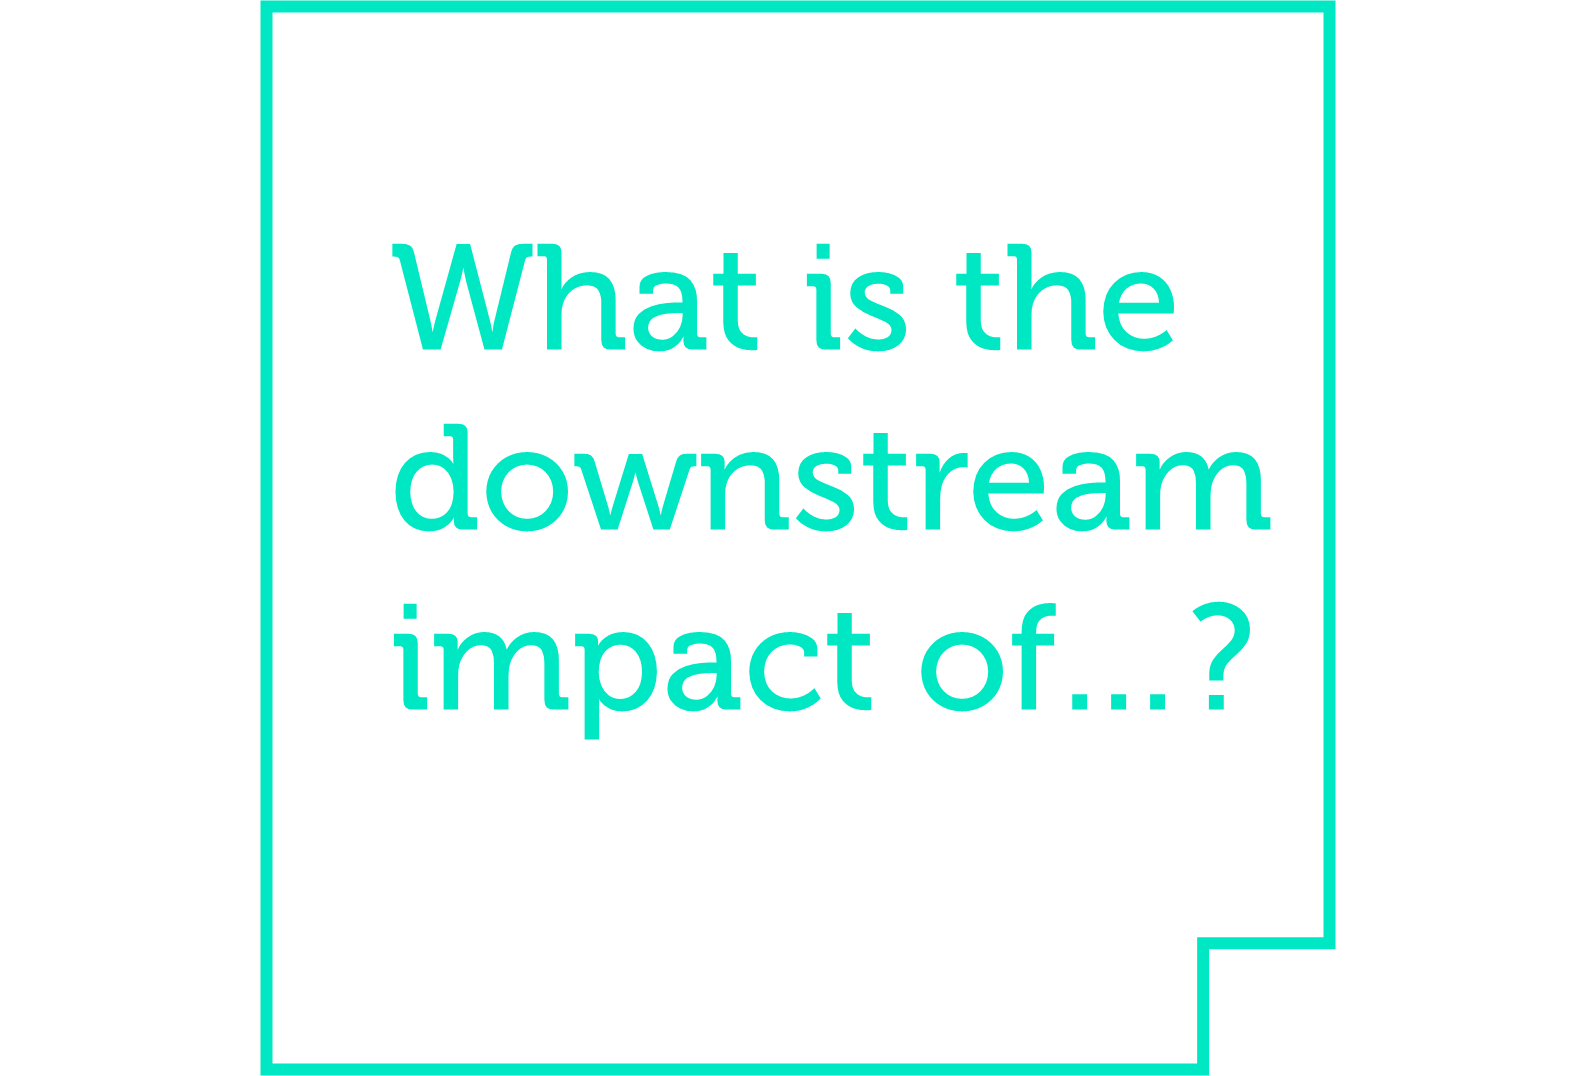 Axon: What is the downstream impact of...?